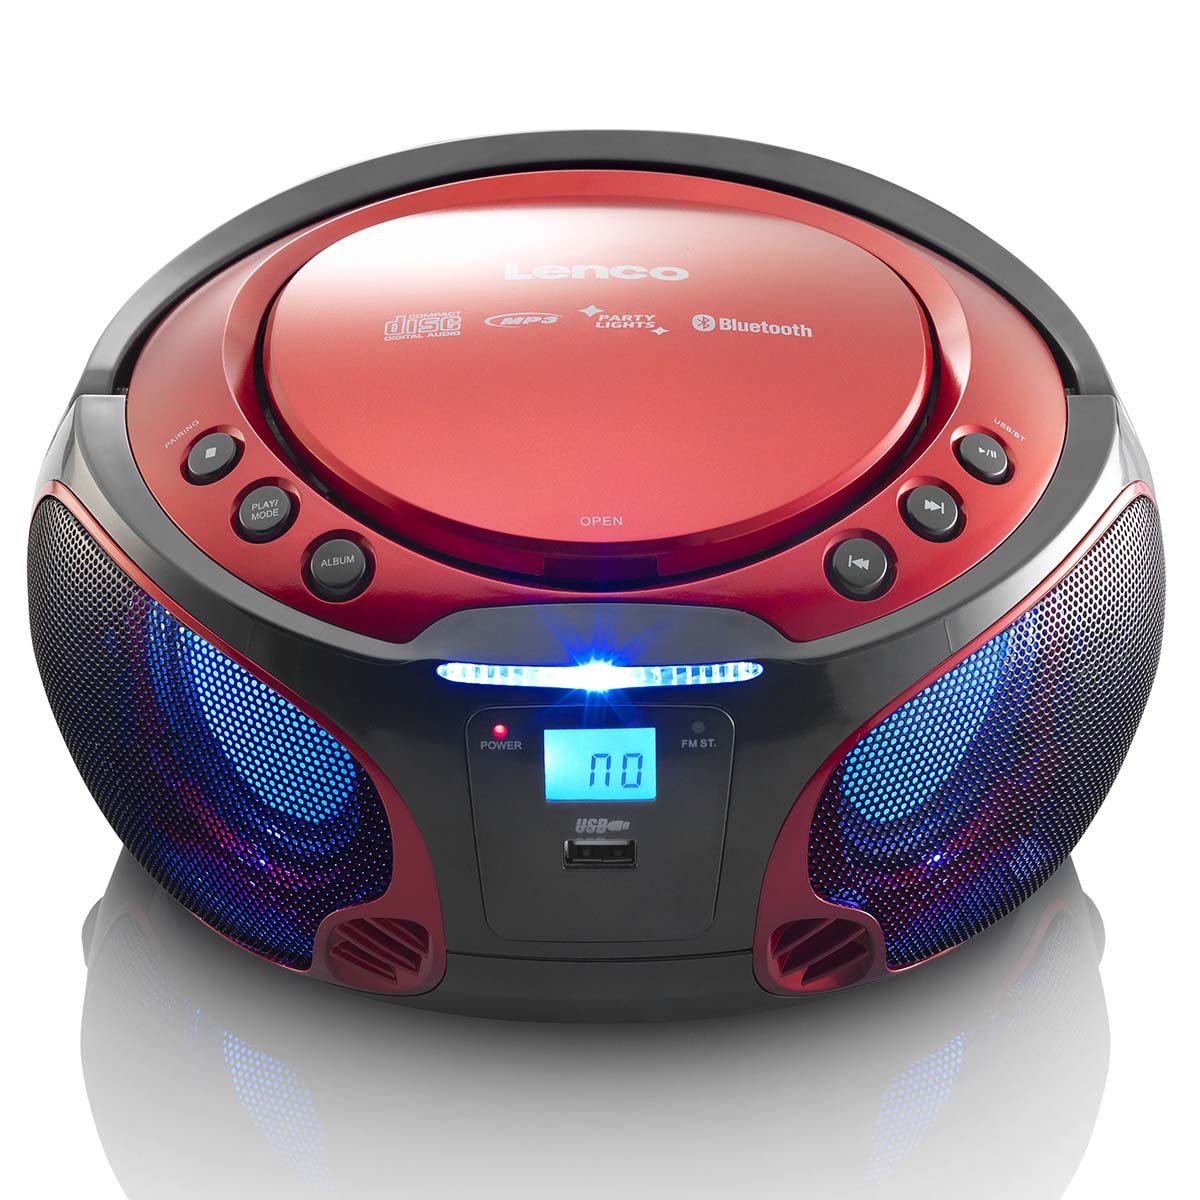 SCD-550RD Tragbares UKW-Radio CD/MP3/USB/Bluetooth-Player® mit LED-Beleuchtung Rot